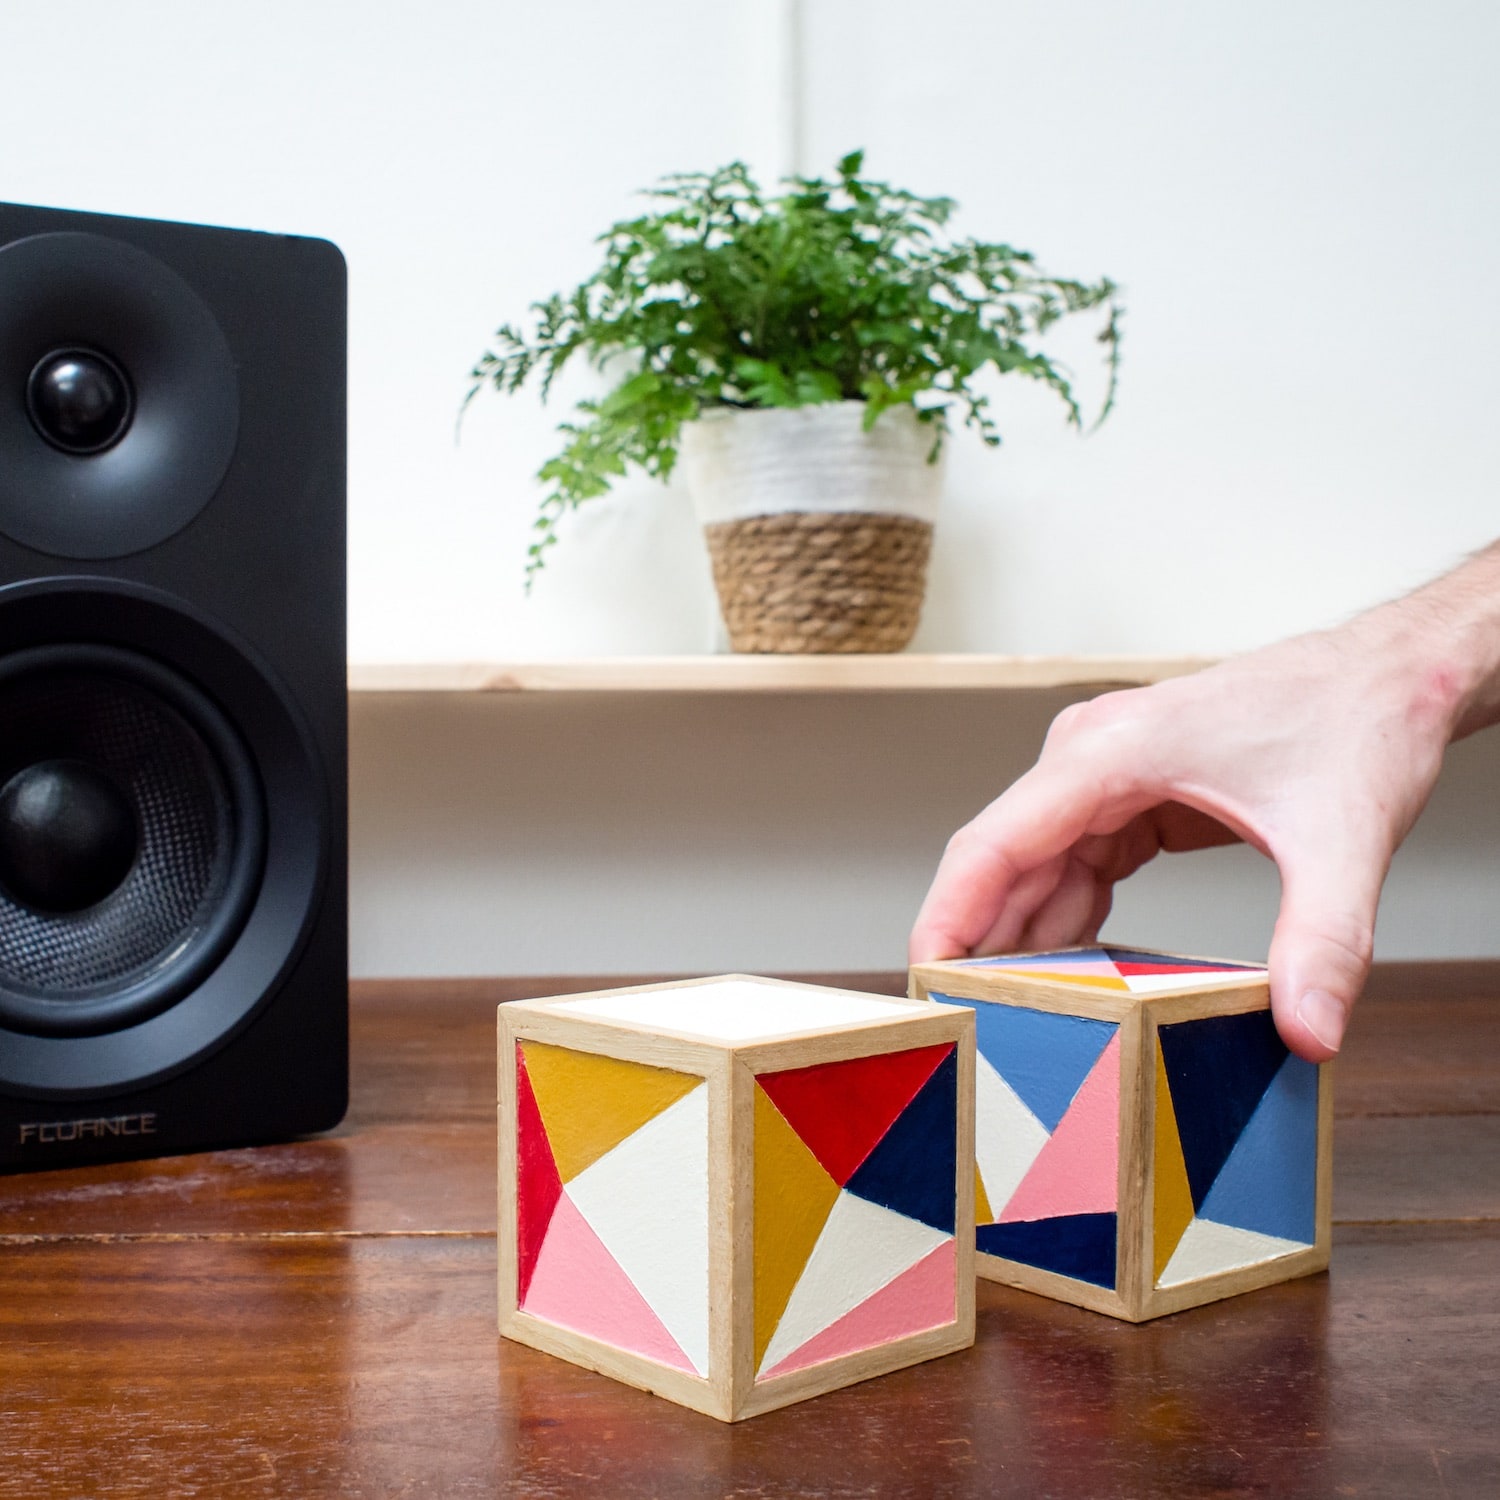 A photo of a hand grabbing ml.cubes prototype on a wooden desk next to a music speaker and fern plant.